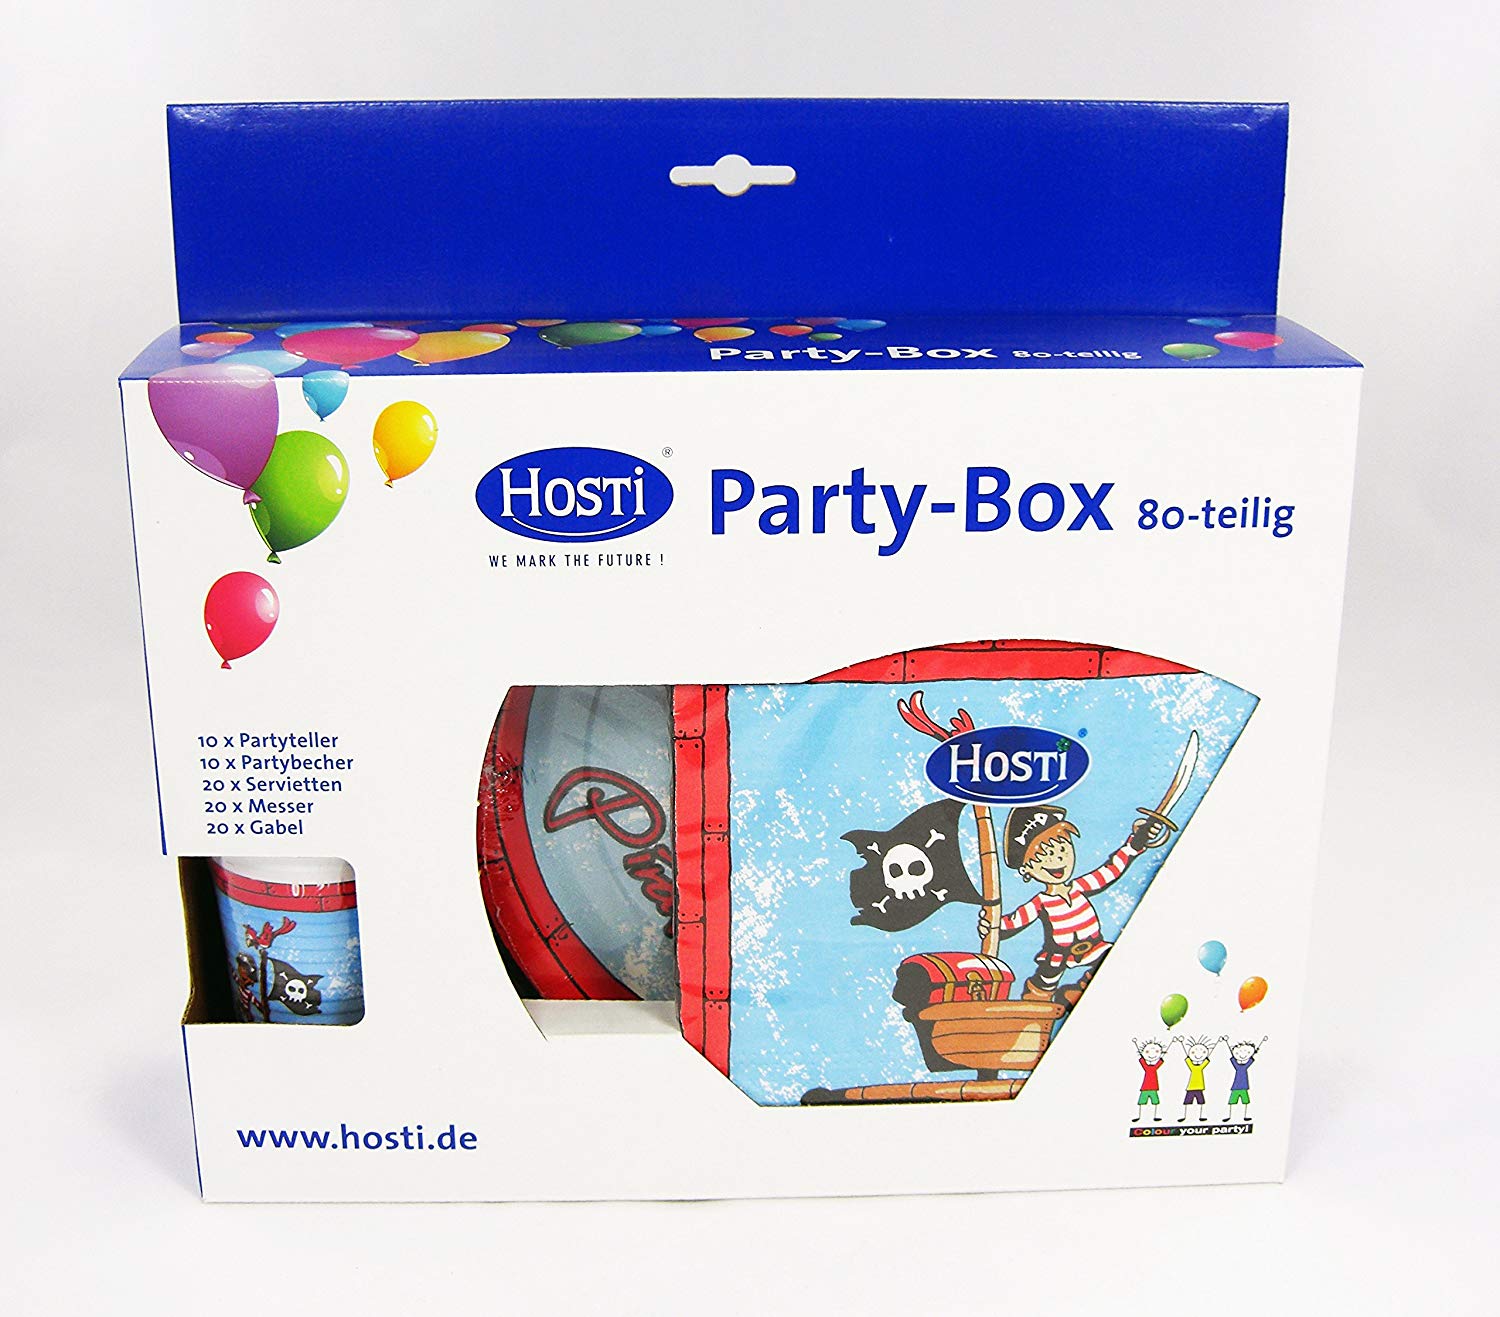 Partybox "Pirate"